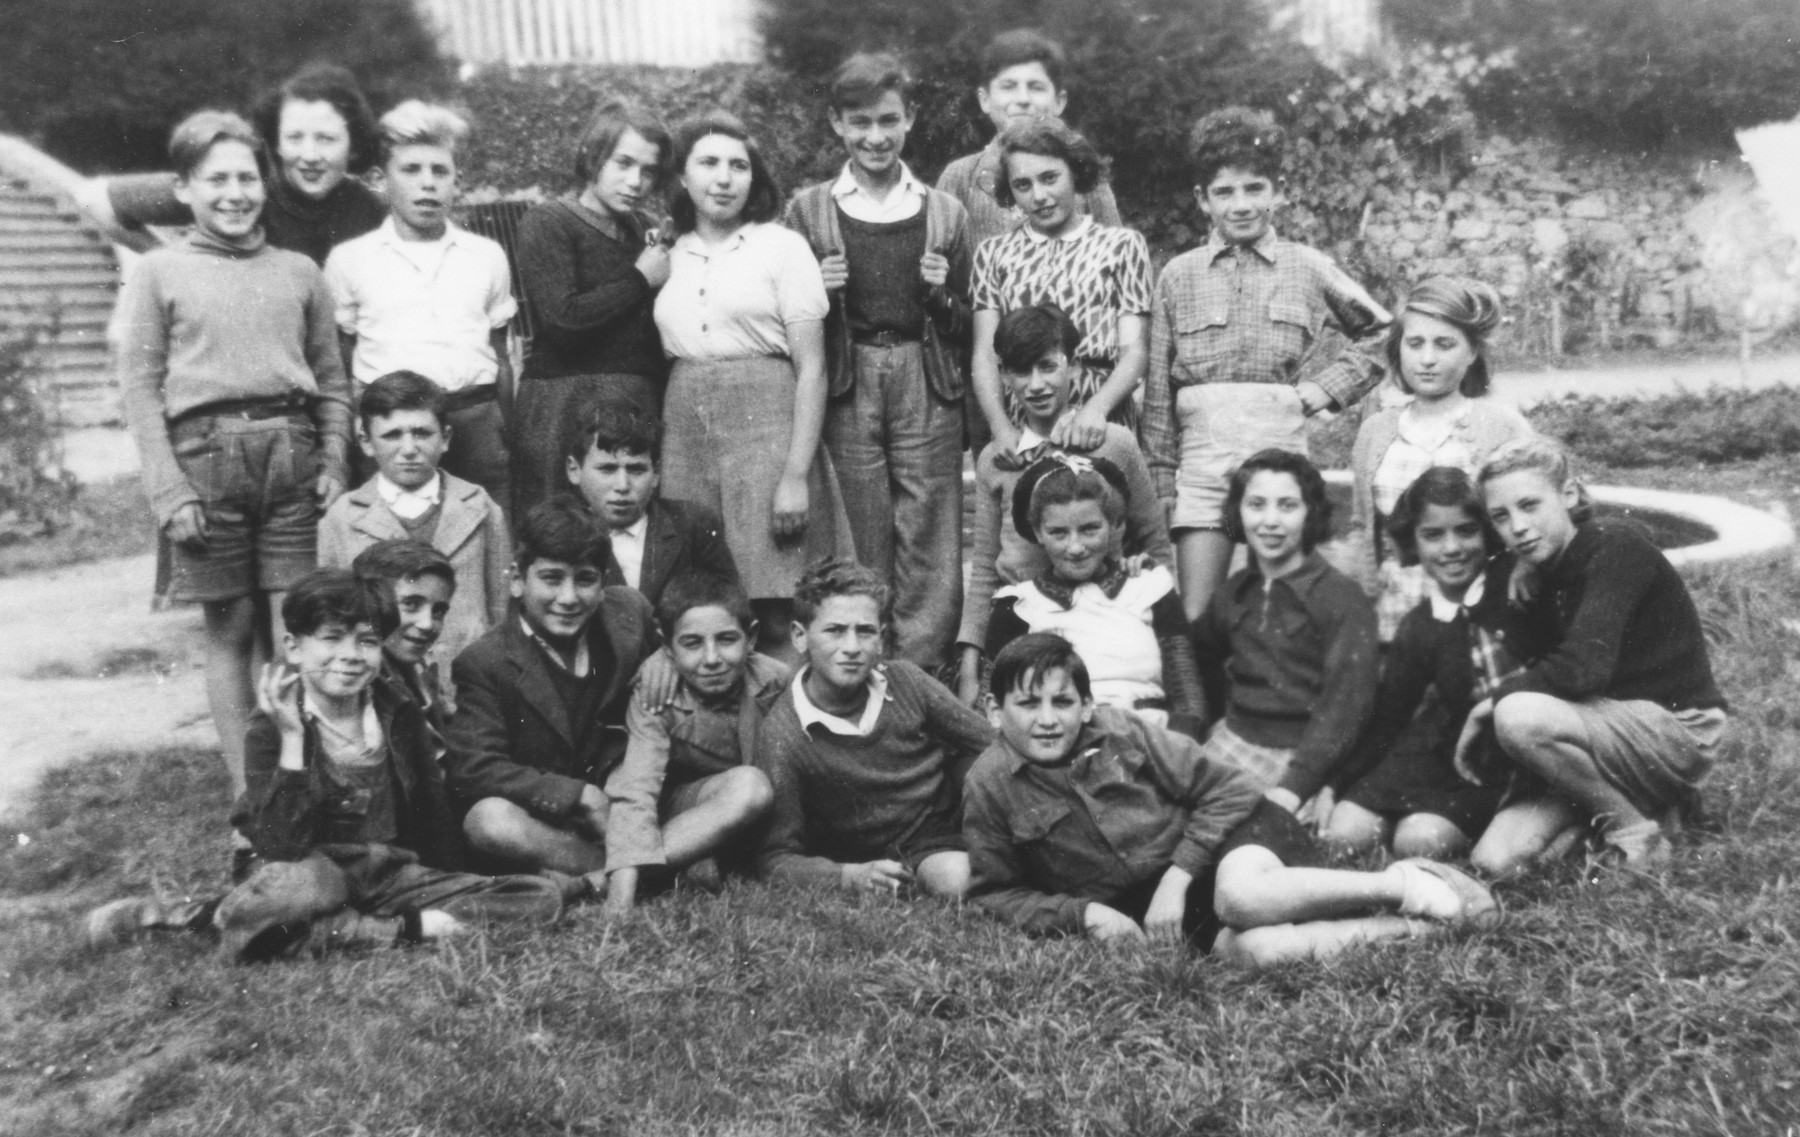 Group portrait of Jewish children at the OSE (Oeuvre de Secours aux Enfants) children's home at the Château Masgelier.  

Edith Loeb is pictured standing second from the right with her arms on the shoulders of Kurt Leuchter.  The two were married in New York in 1950.  Also pictured are Francine Knopf (kneeling front row, far right), Jorette (to Francine's left), and Renee Spindel (kneeling second row, far right).  Standing left to right are Herbert Friedman, Marianne, Jacques Schlief, [unidentified], and Rebecca Sendyk (fifth from the left). Hermann Rosenfeld is  pictured second row, second from the left.